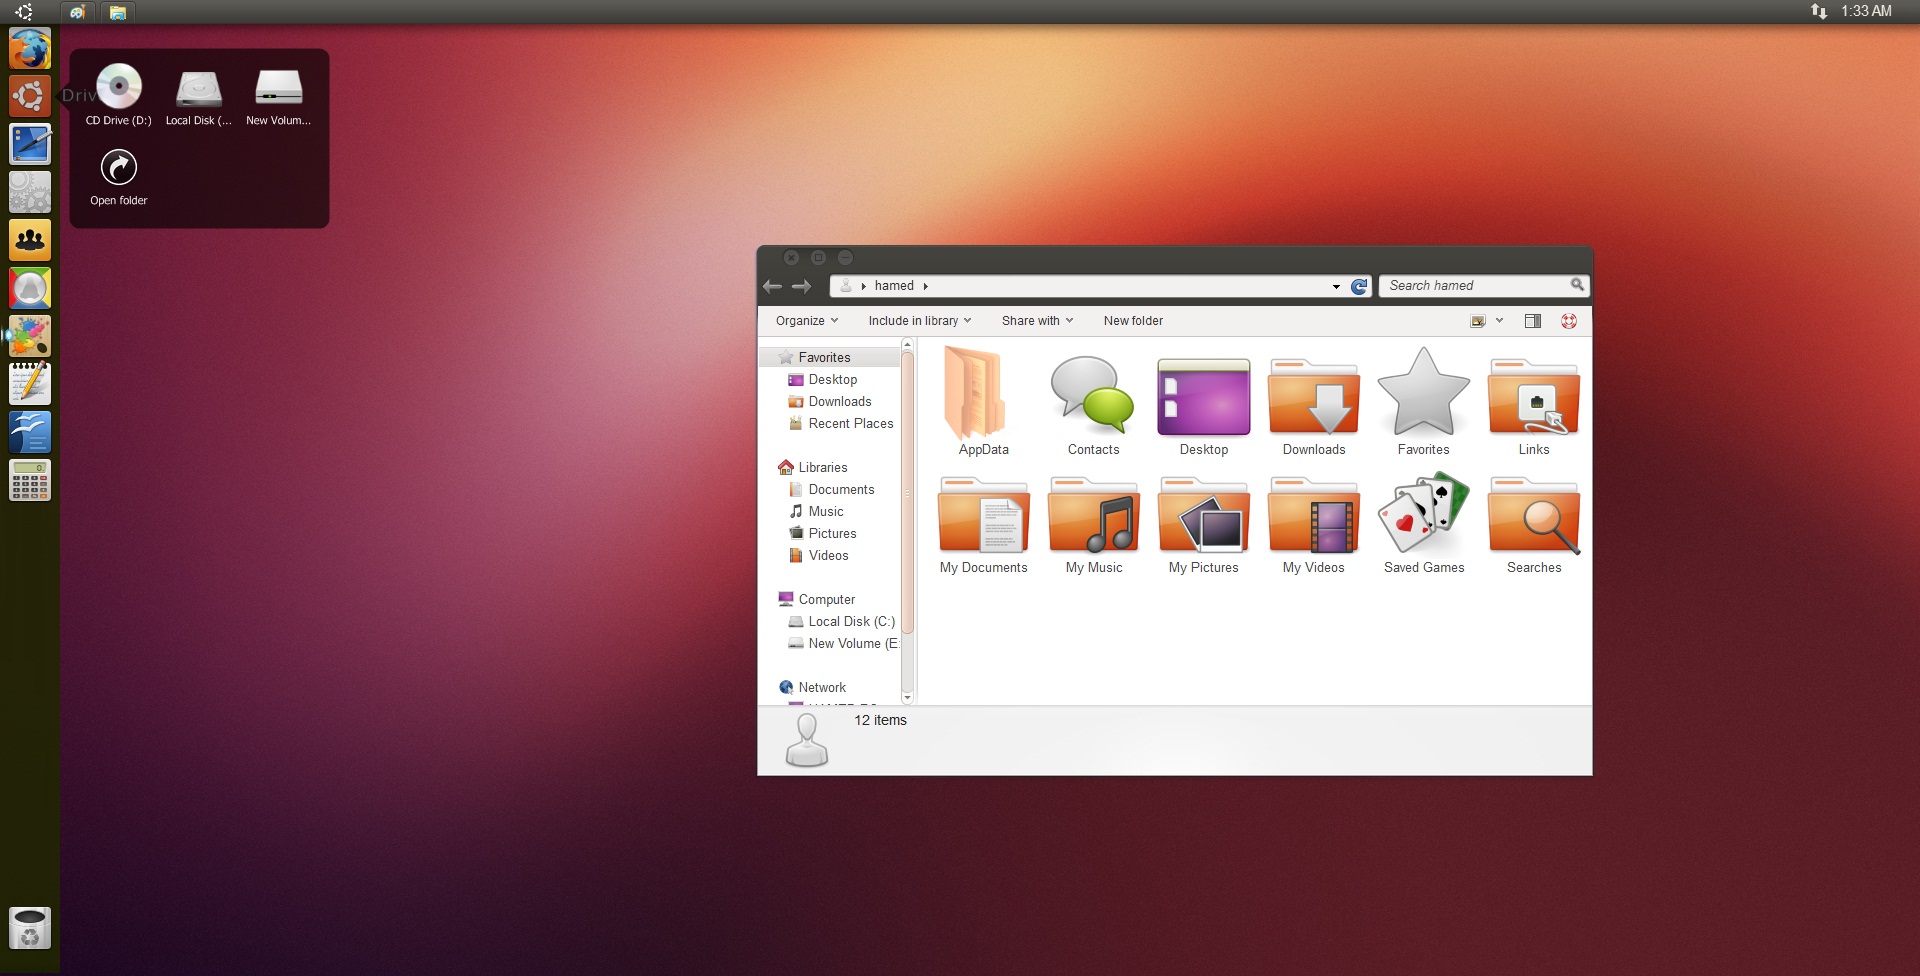 Gnome ThemePack for Win8/8.1/7 released